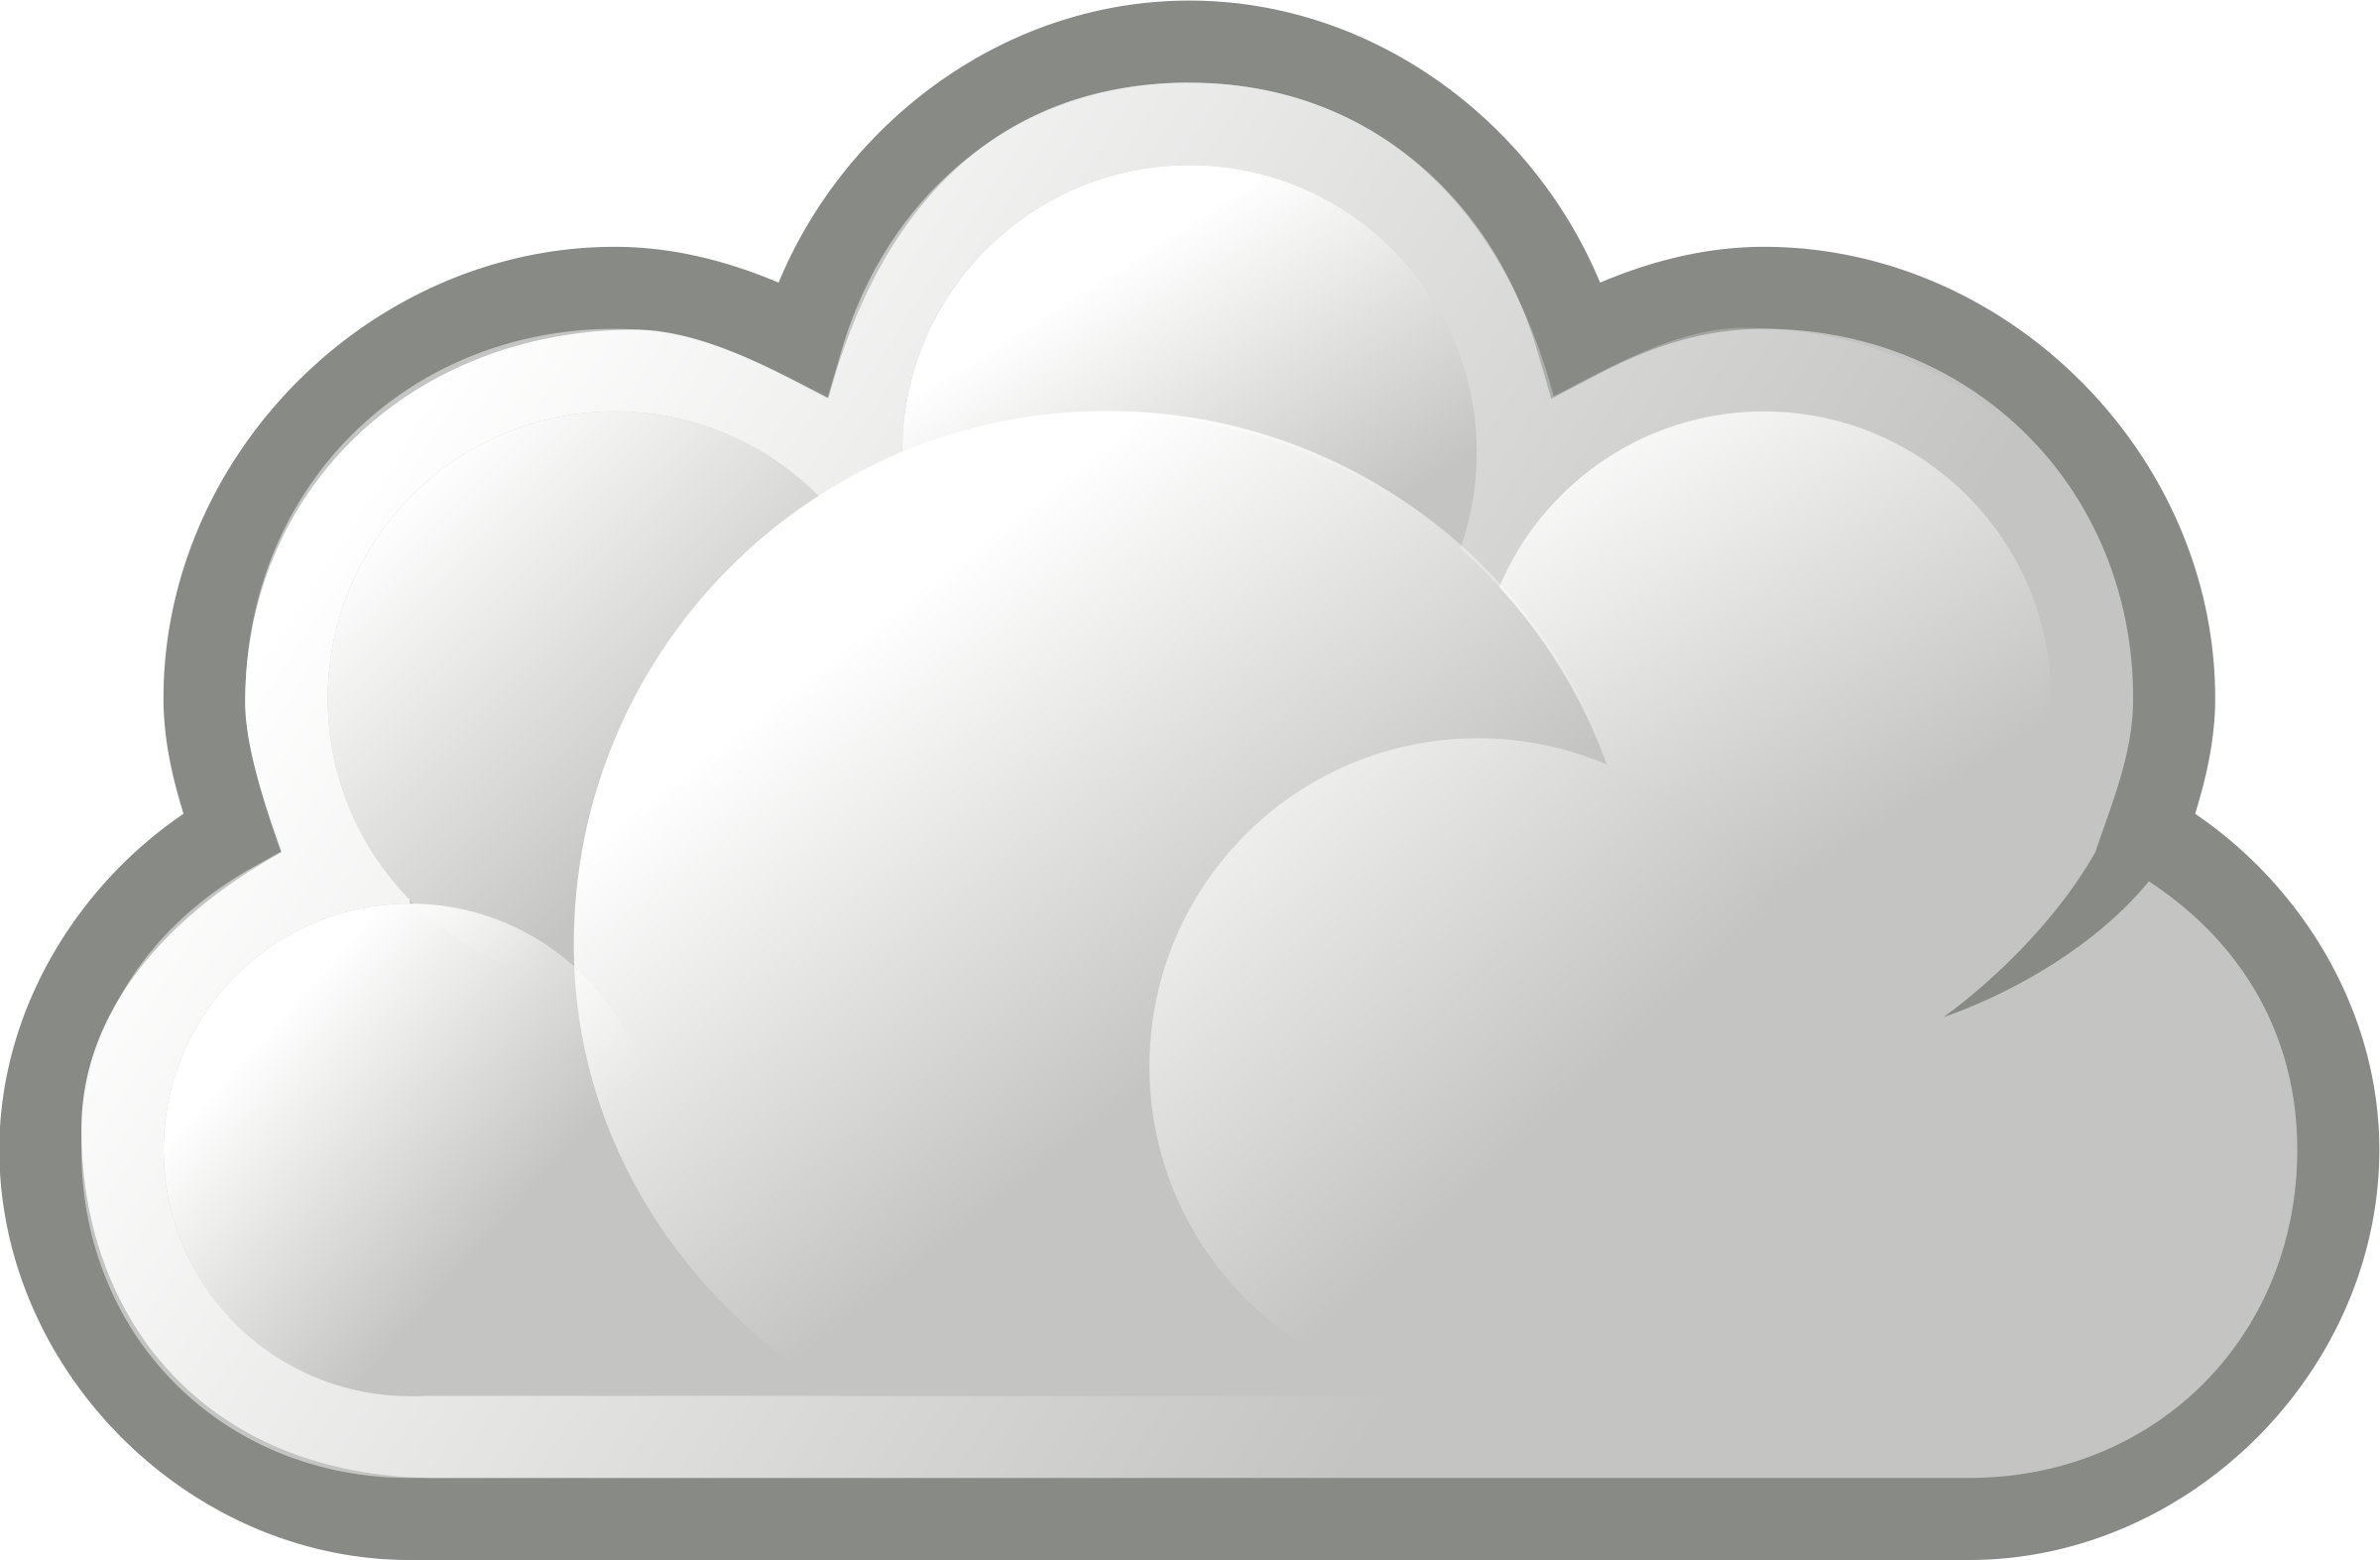 Gray Clouds Clipart - Weather Symbols.